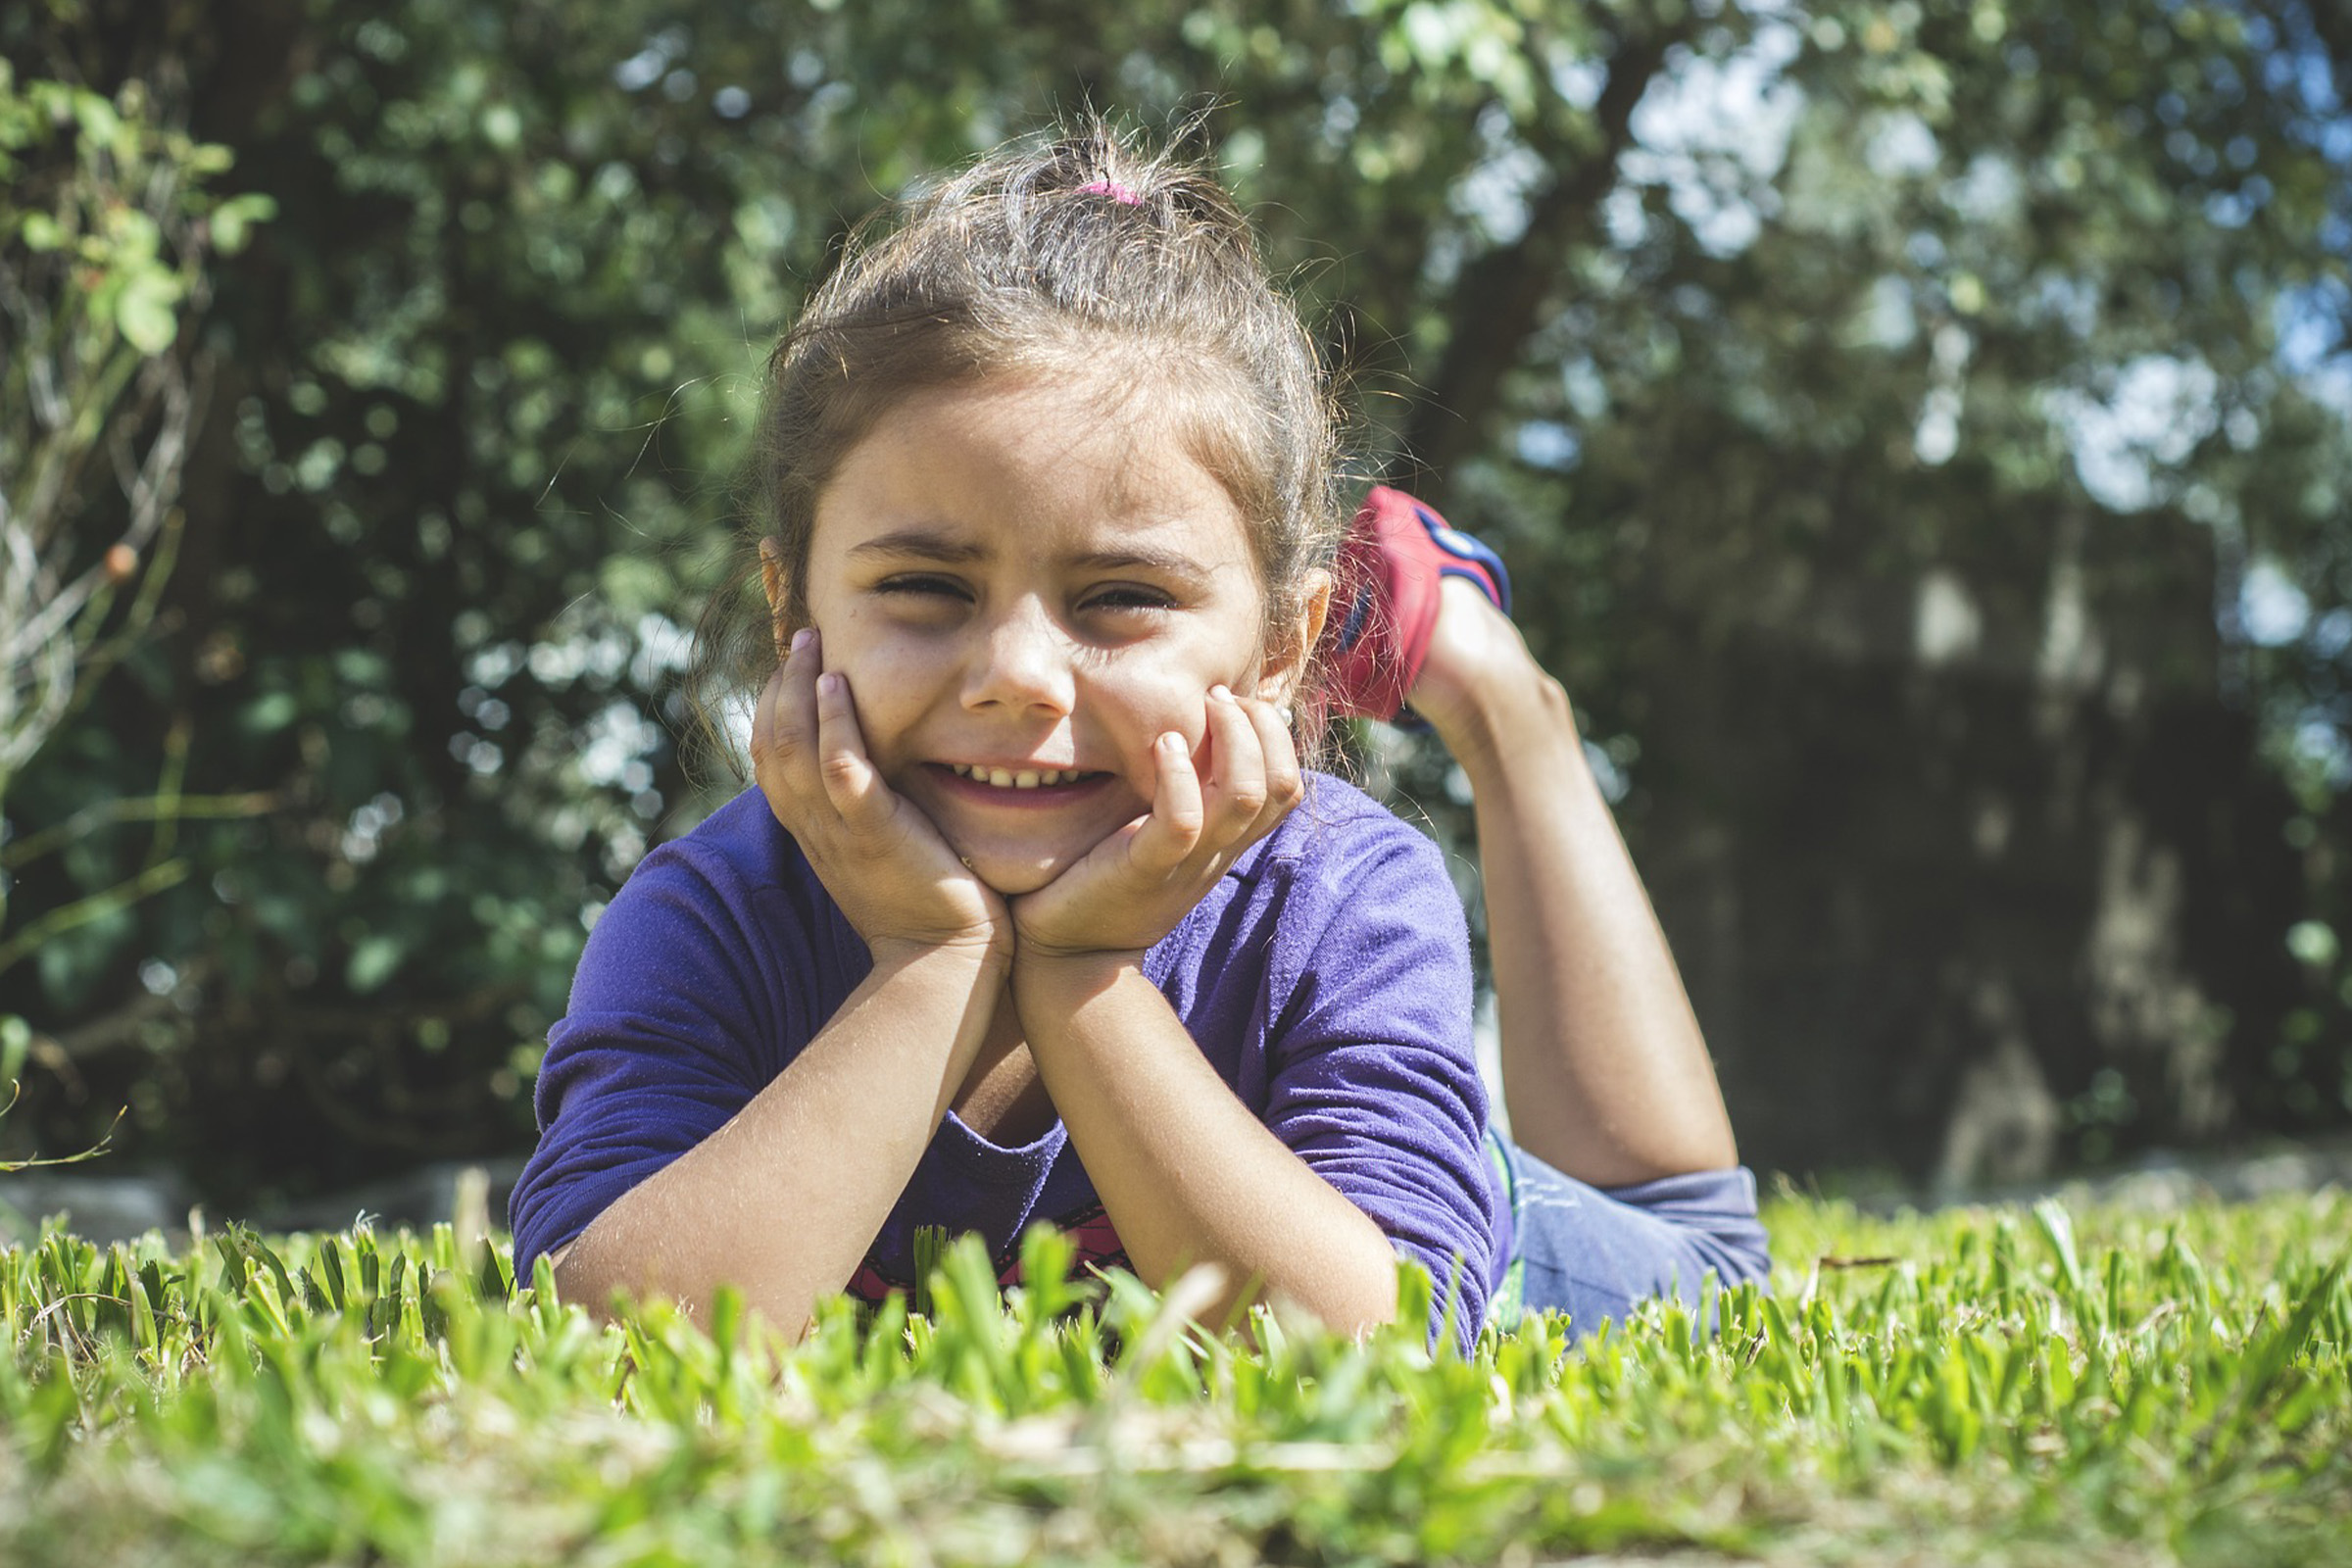 photo of young girl sitting in grass